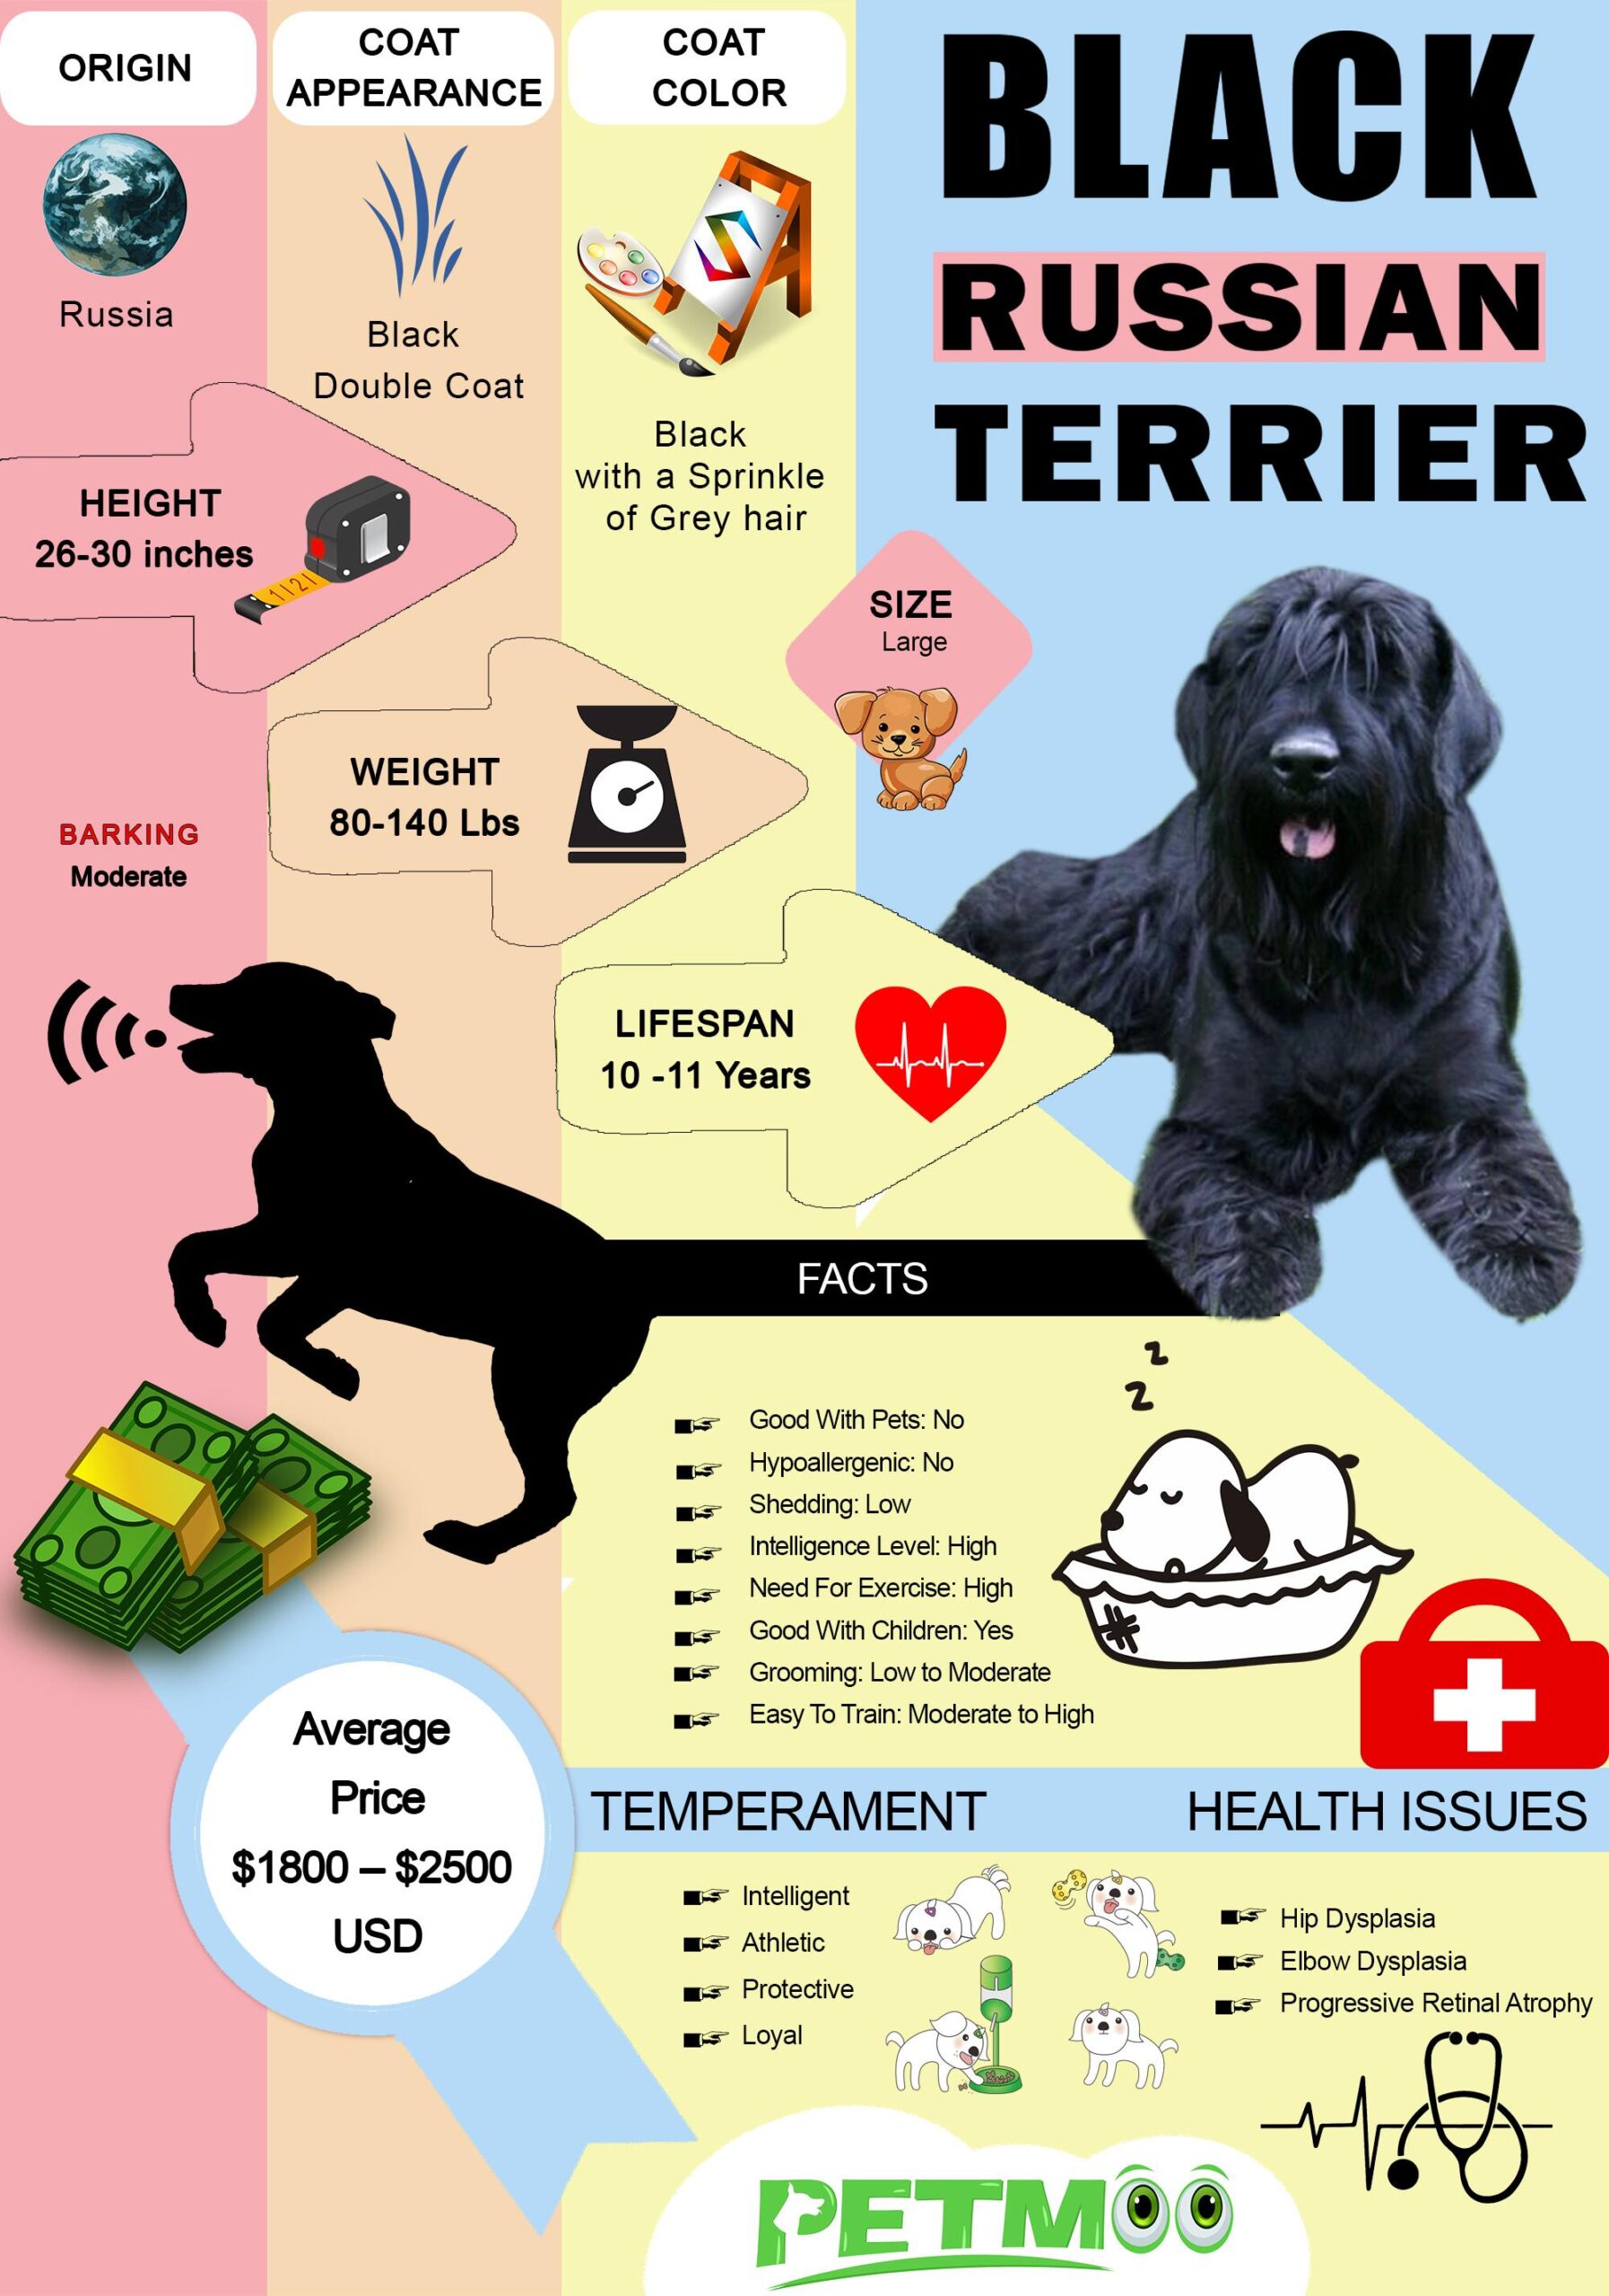 Black Russian Terrier Infographic